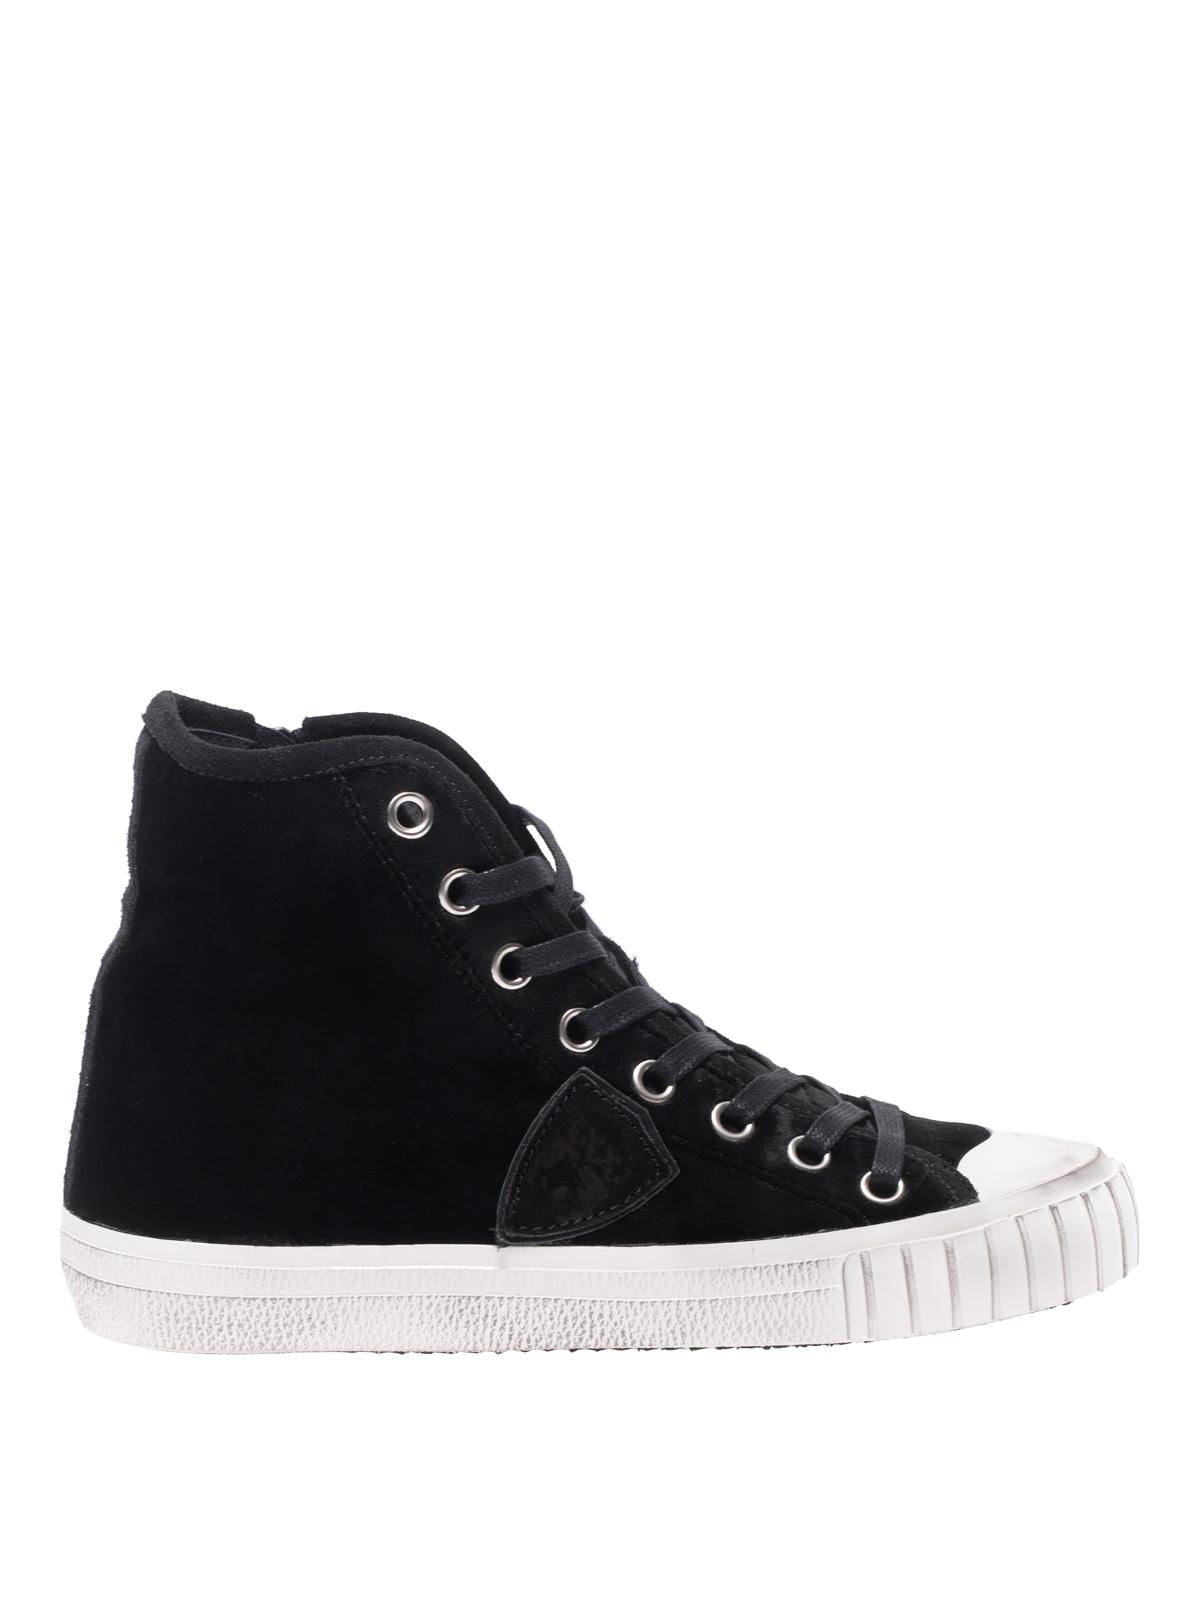 Philippe Model Rubber Gare Lace-up High-top Velvet Sneakers in Black ...